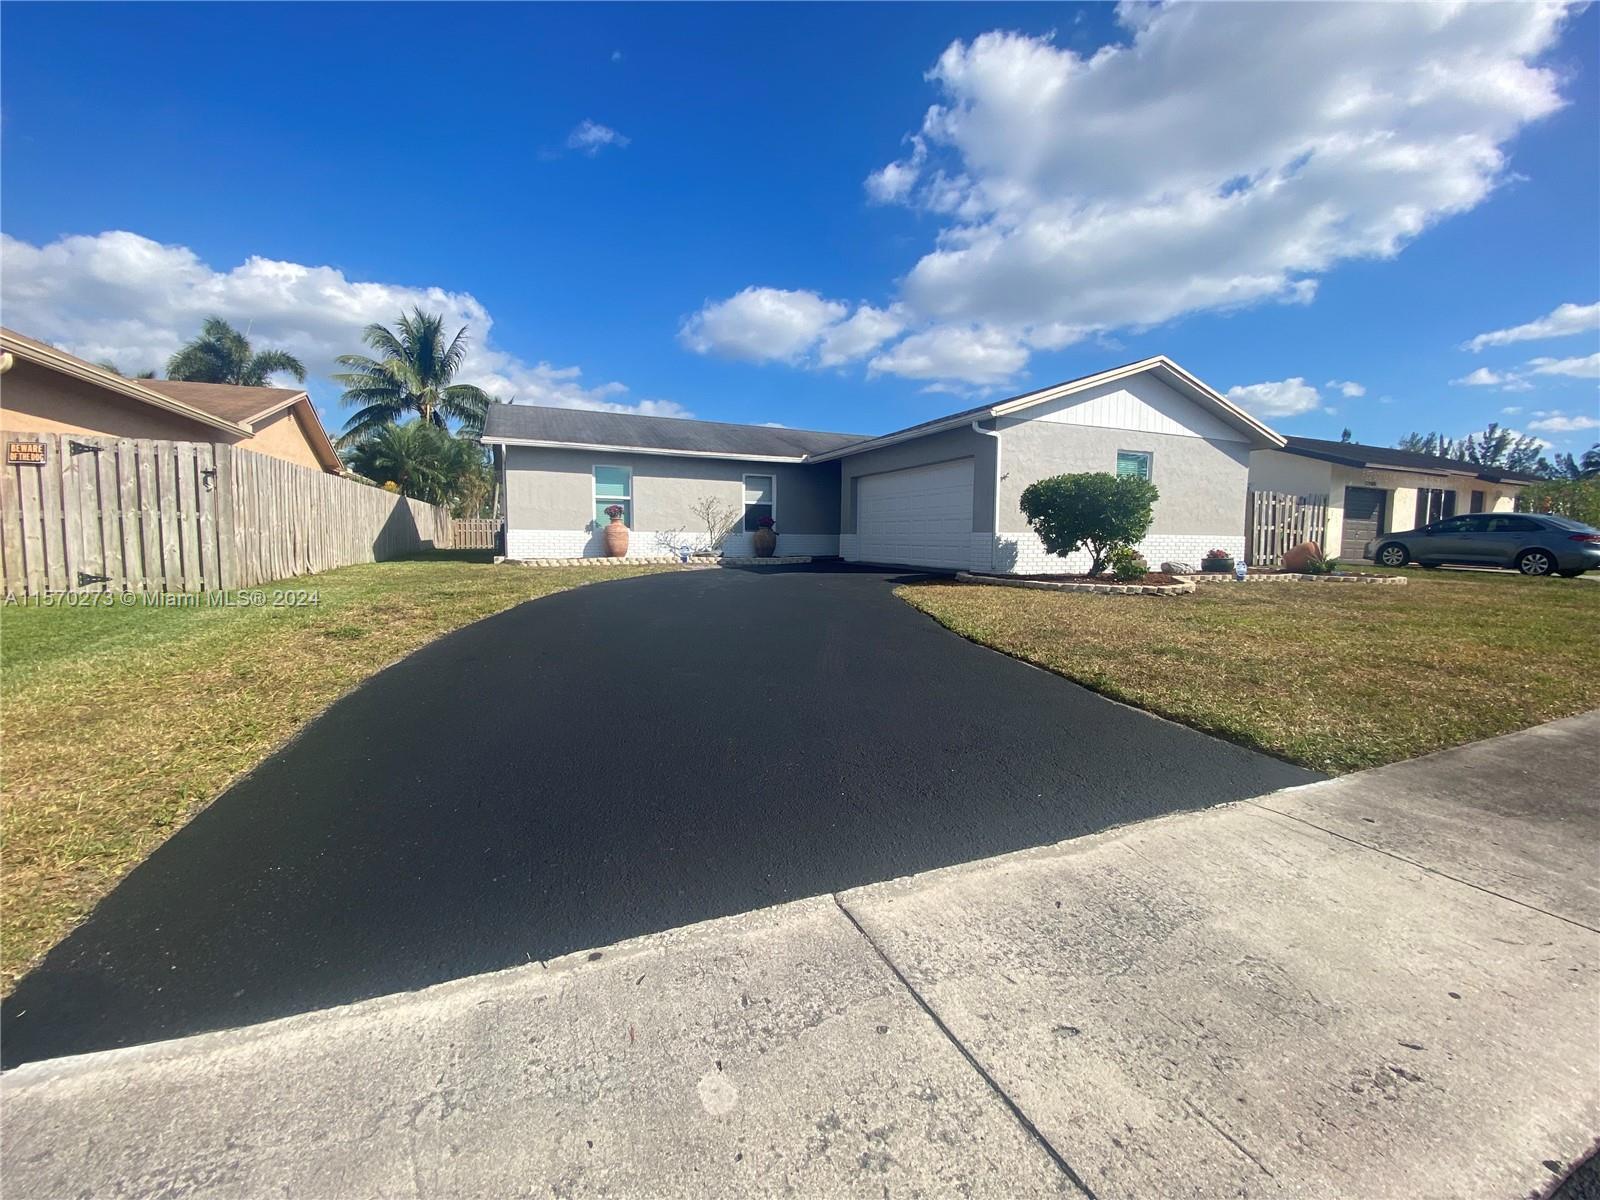 Photo of 2120 NW 111th Ave in Sunrise, FL